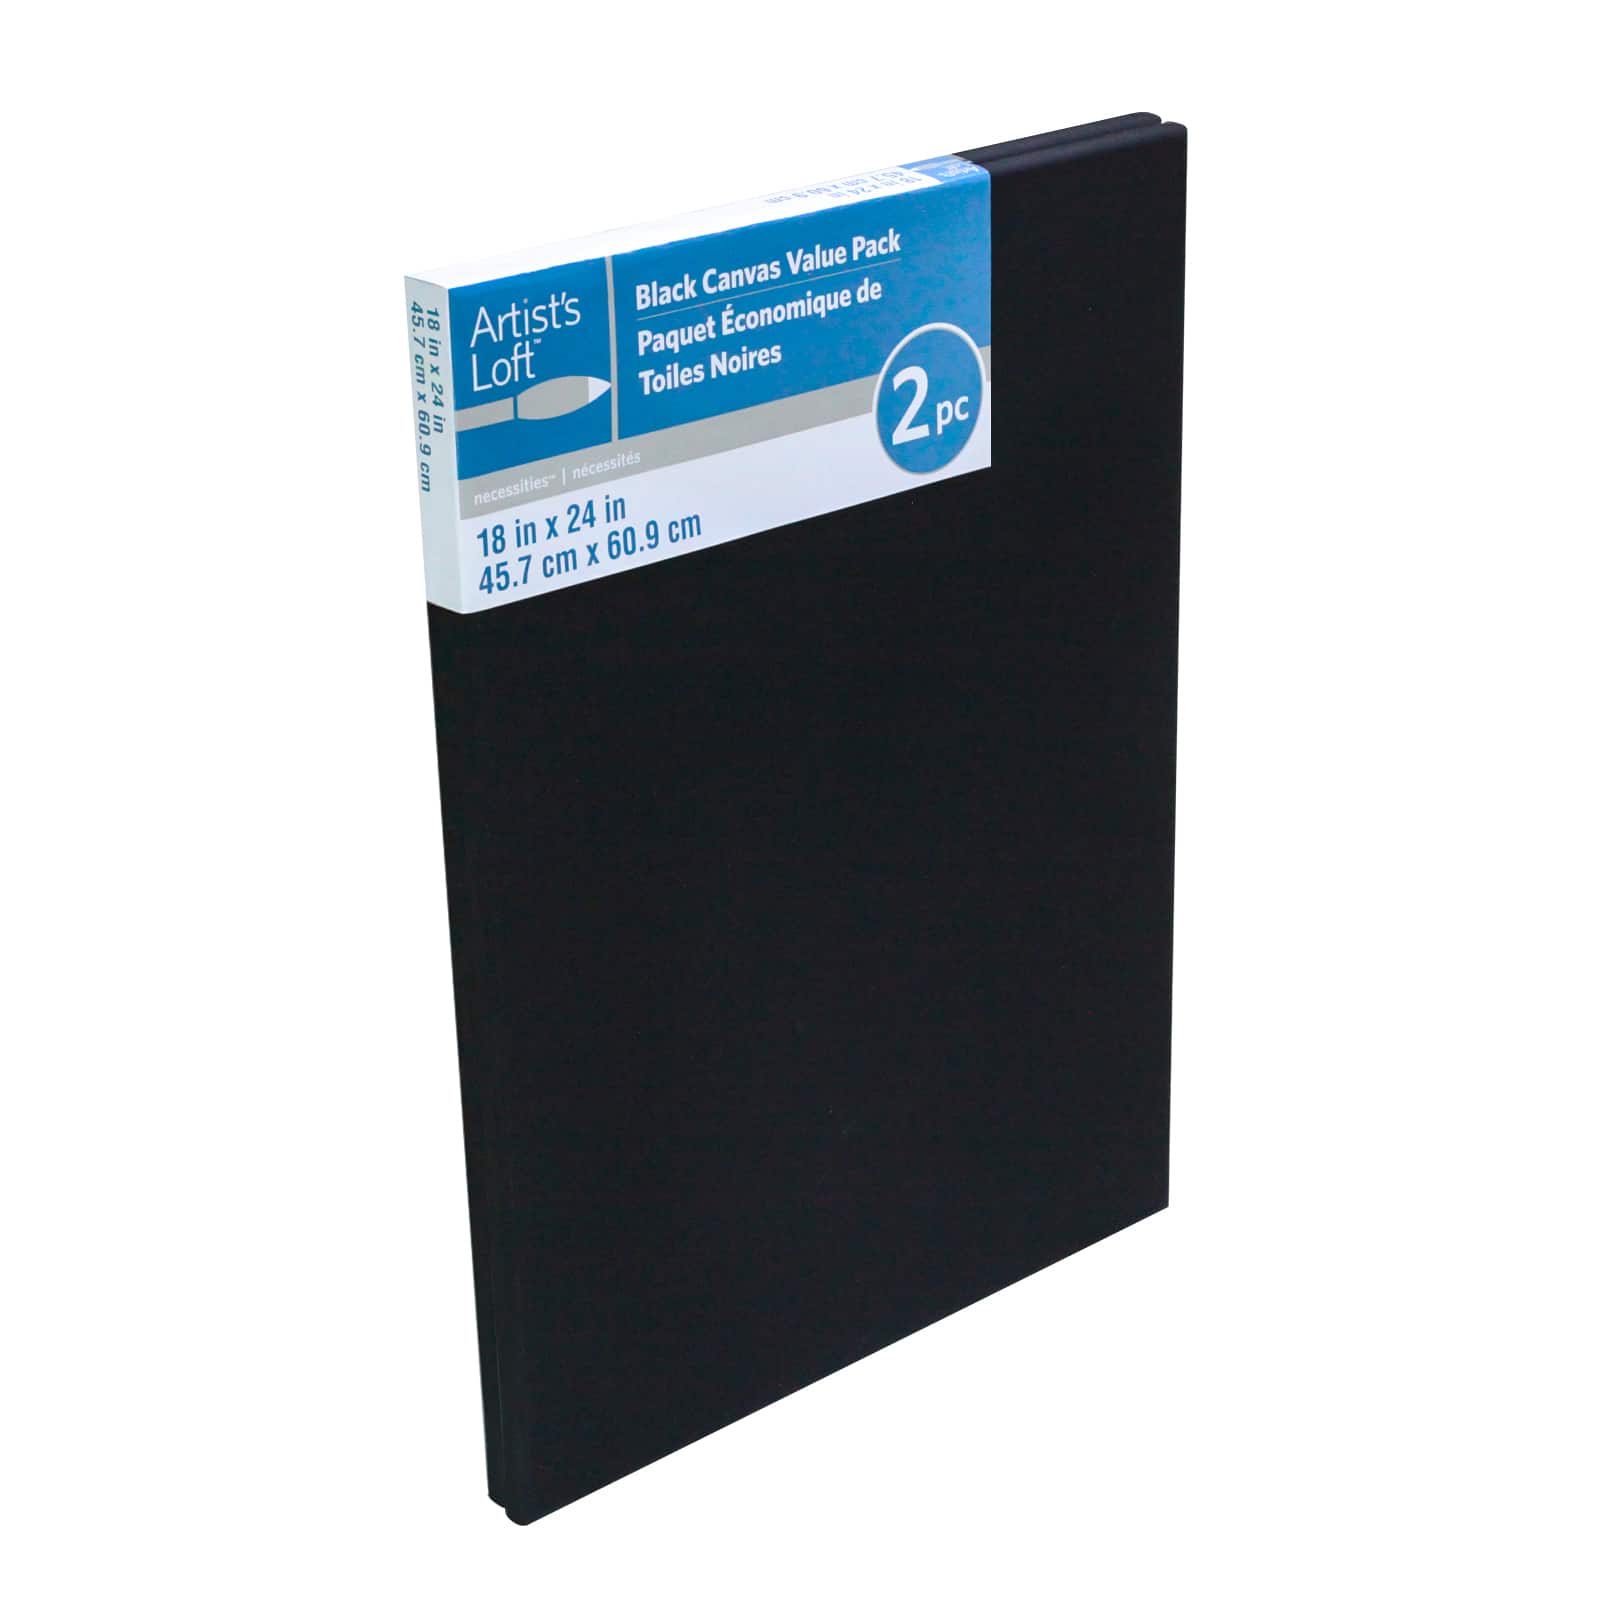 2 Pack Black Canvas Value Pack by Artist&#x27;s Loft&#xAE; Necessities&#x2122;